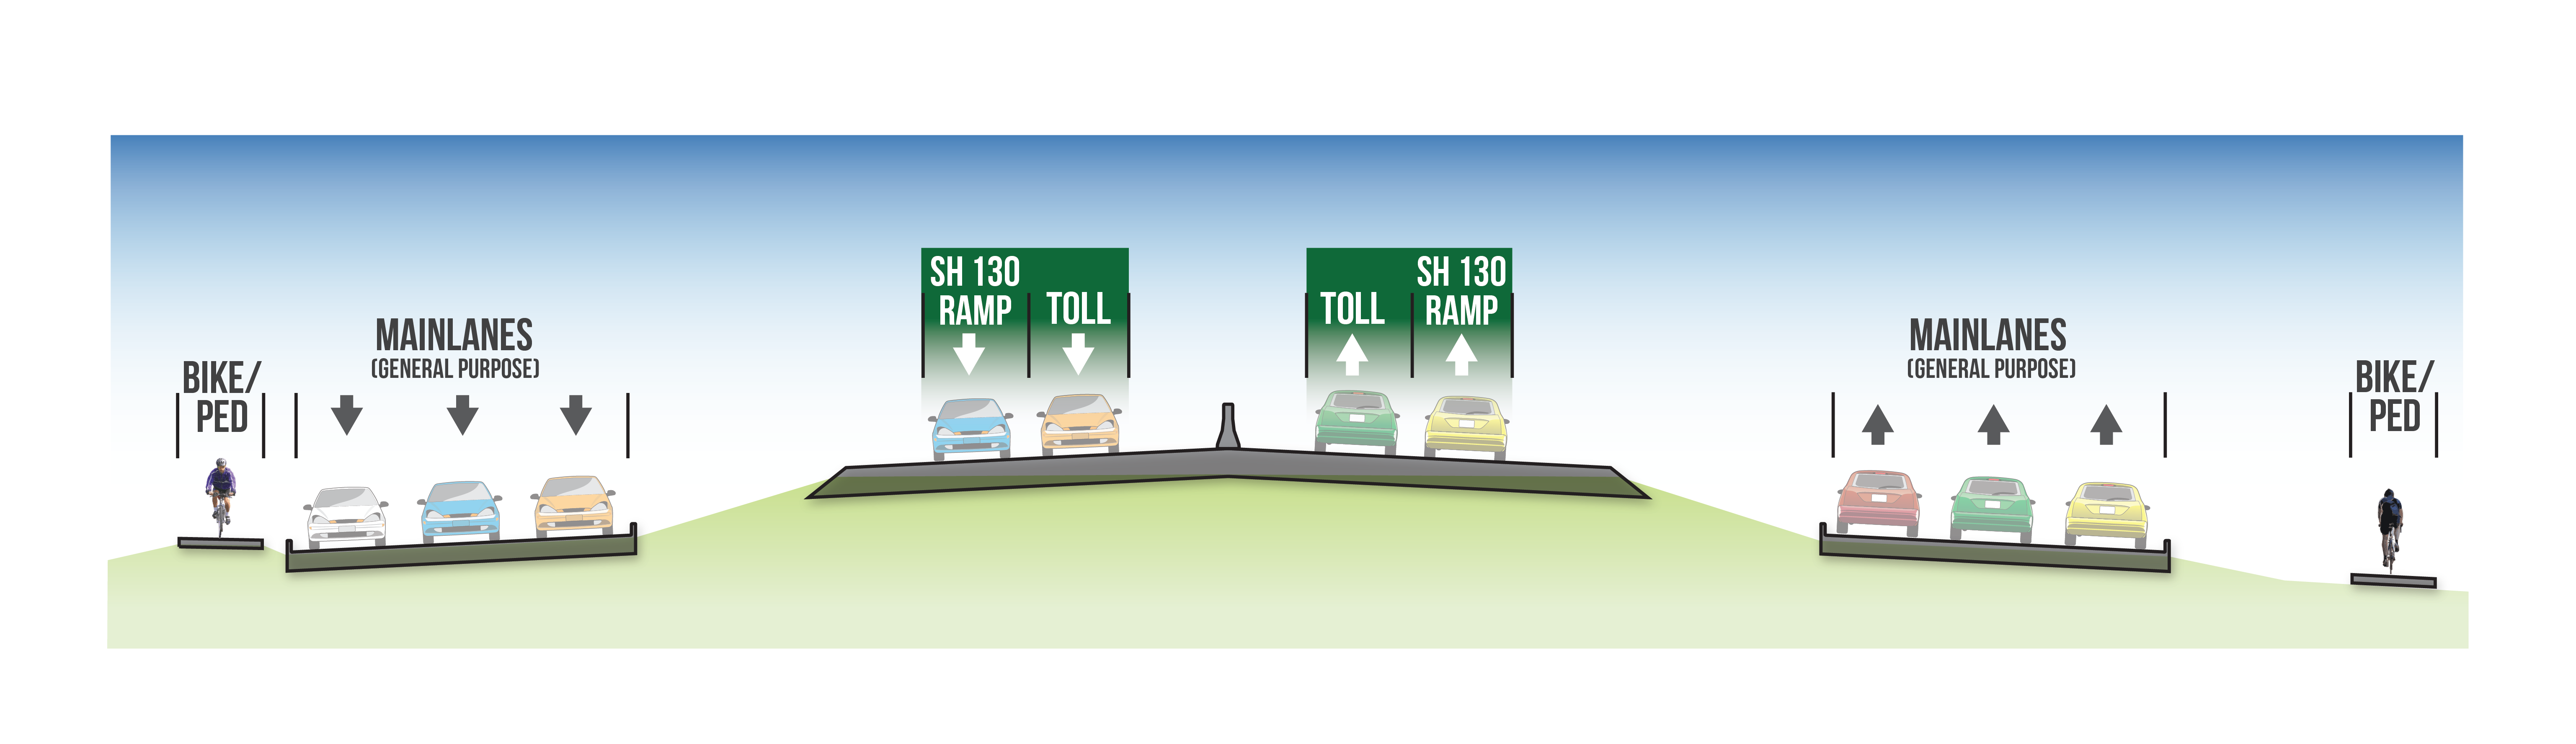 Graphic displaying the 71 toll lane using cars for scale